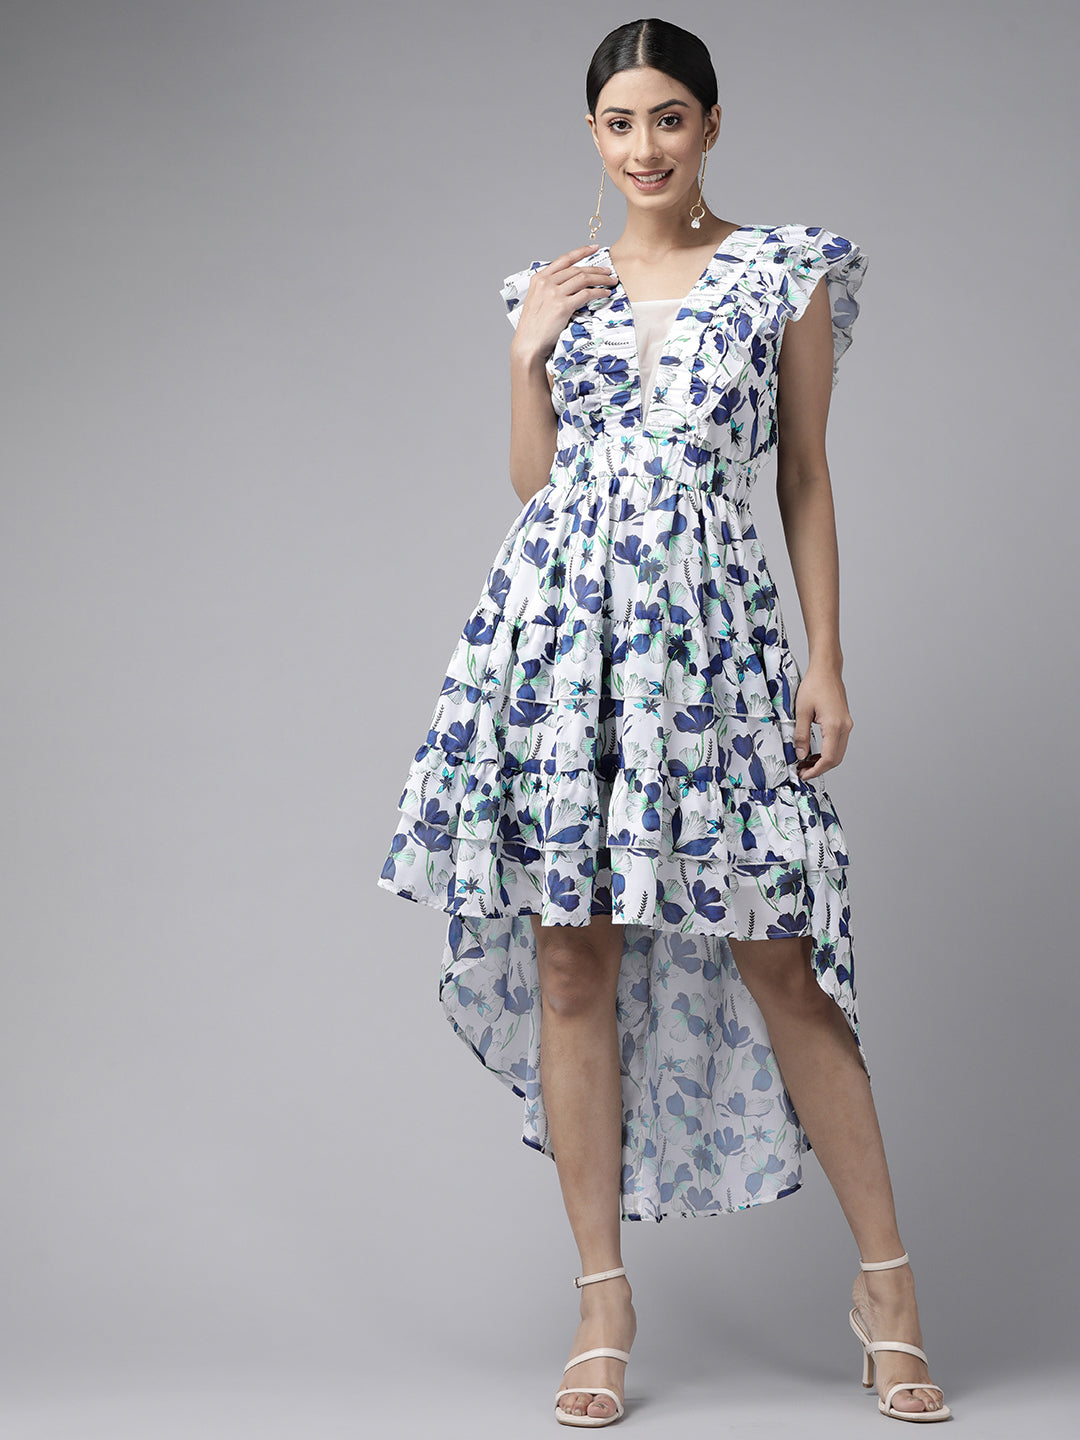 PANIT White  Navy Blue Floral Printed Ruffled Layered A-Line Midi Dress